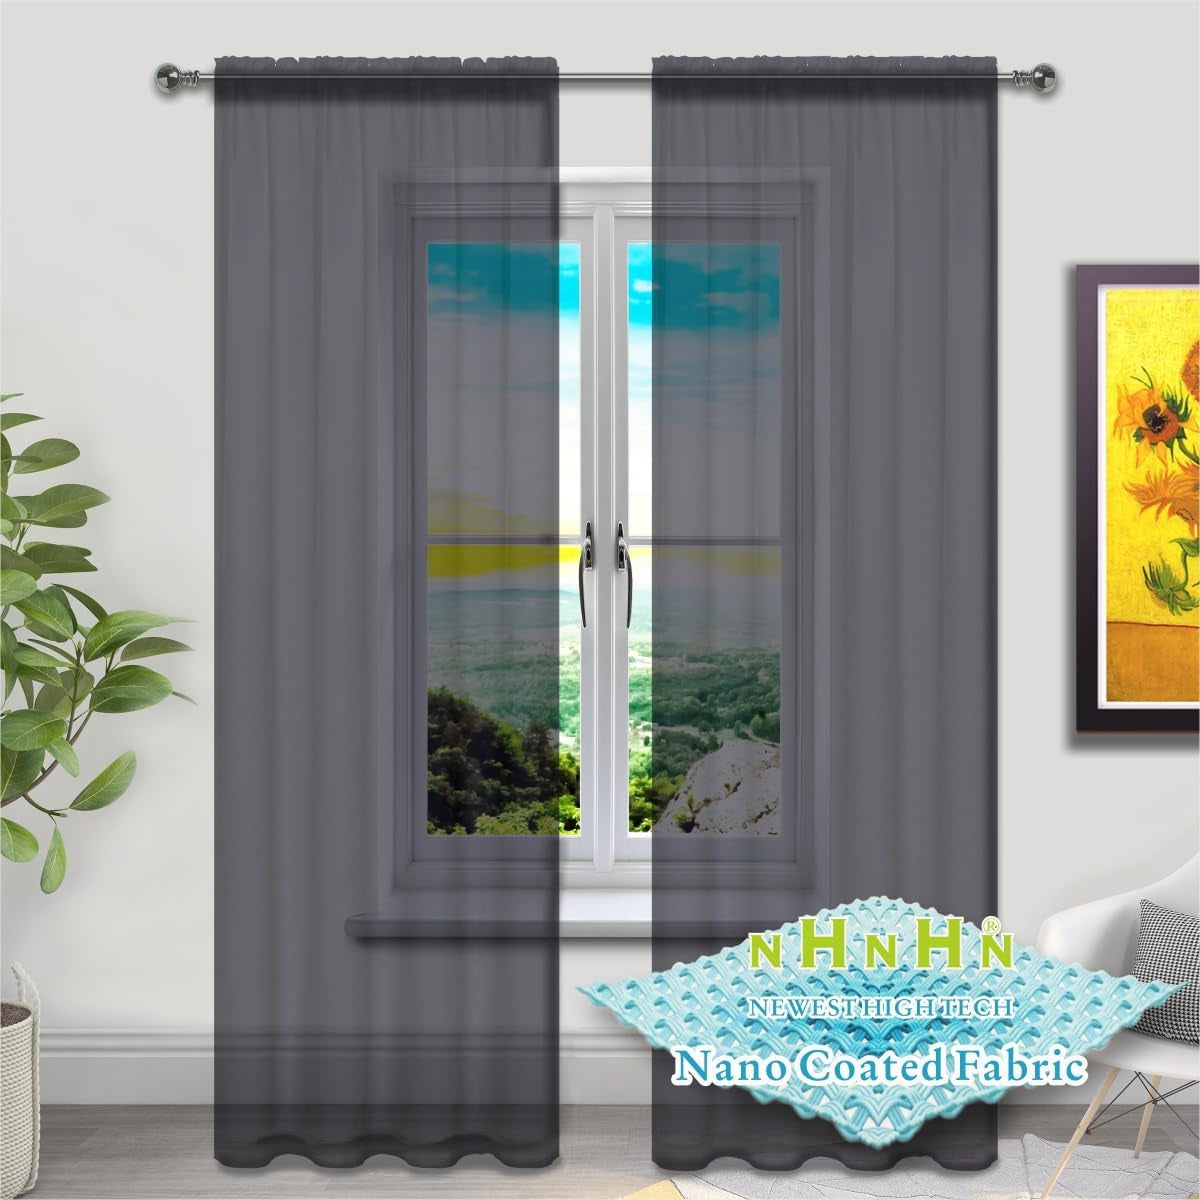 Nano Material Coated White Sheer Curtains 72 Inches Long, Rod Pocket Window Drapes Voile Sheer Curtain 2 Panels for Living Room Bedroom Kitchen (White, W52 X L72)  NHNHN Black 52W X 72L | 2 Panels 